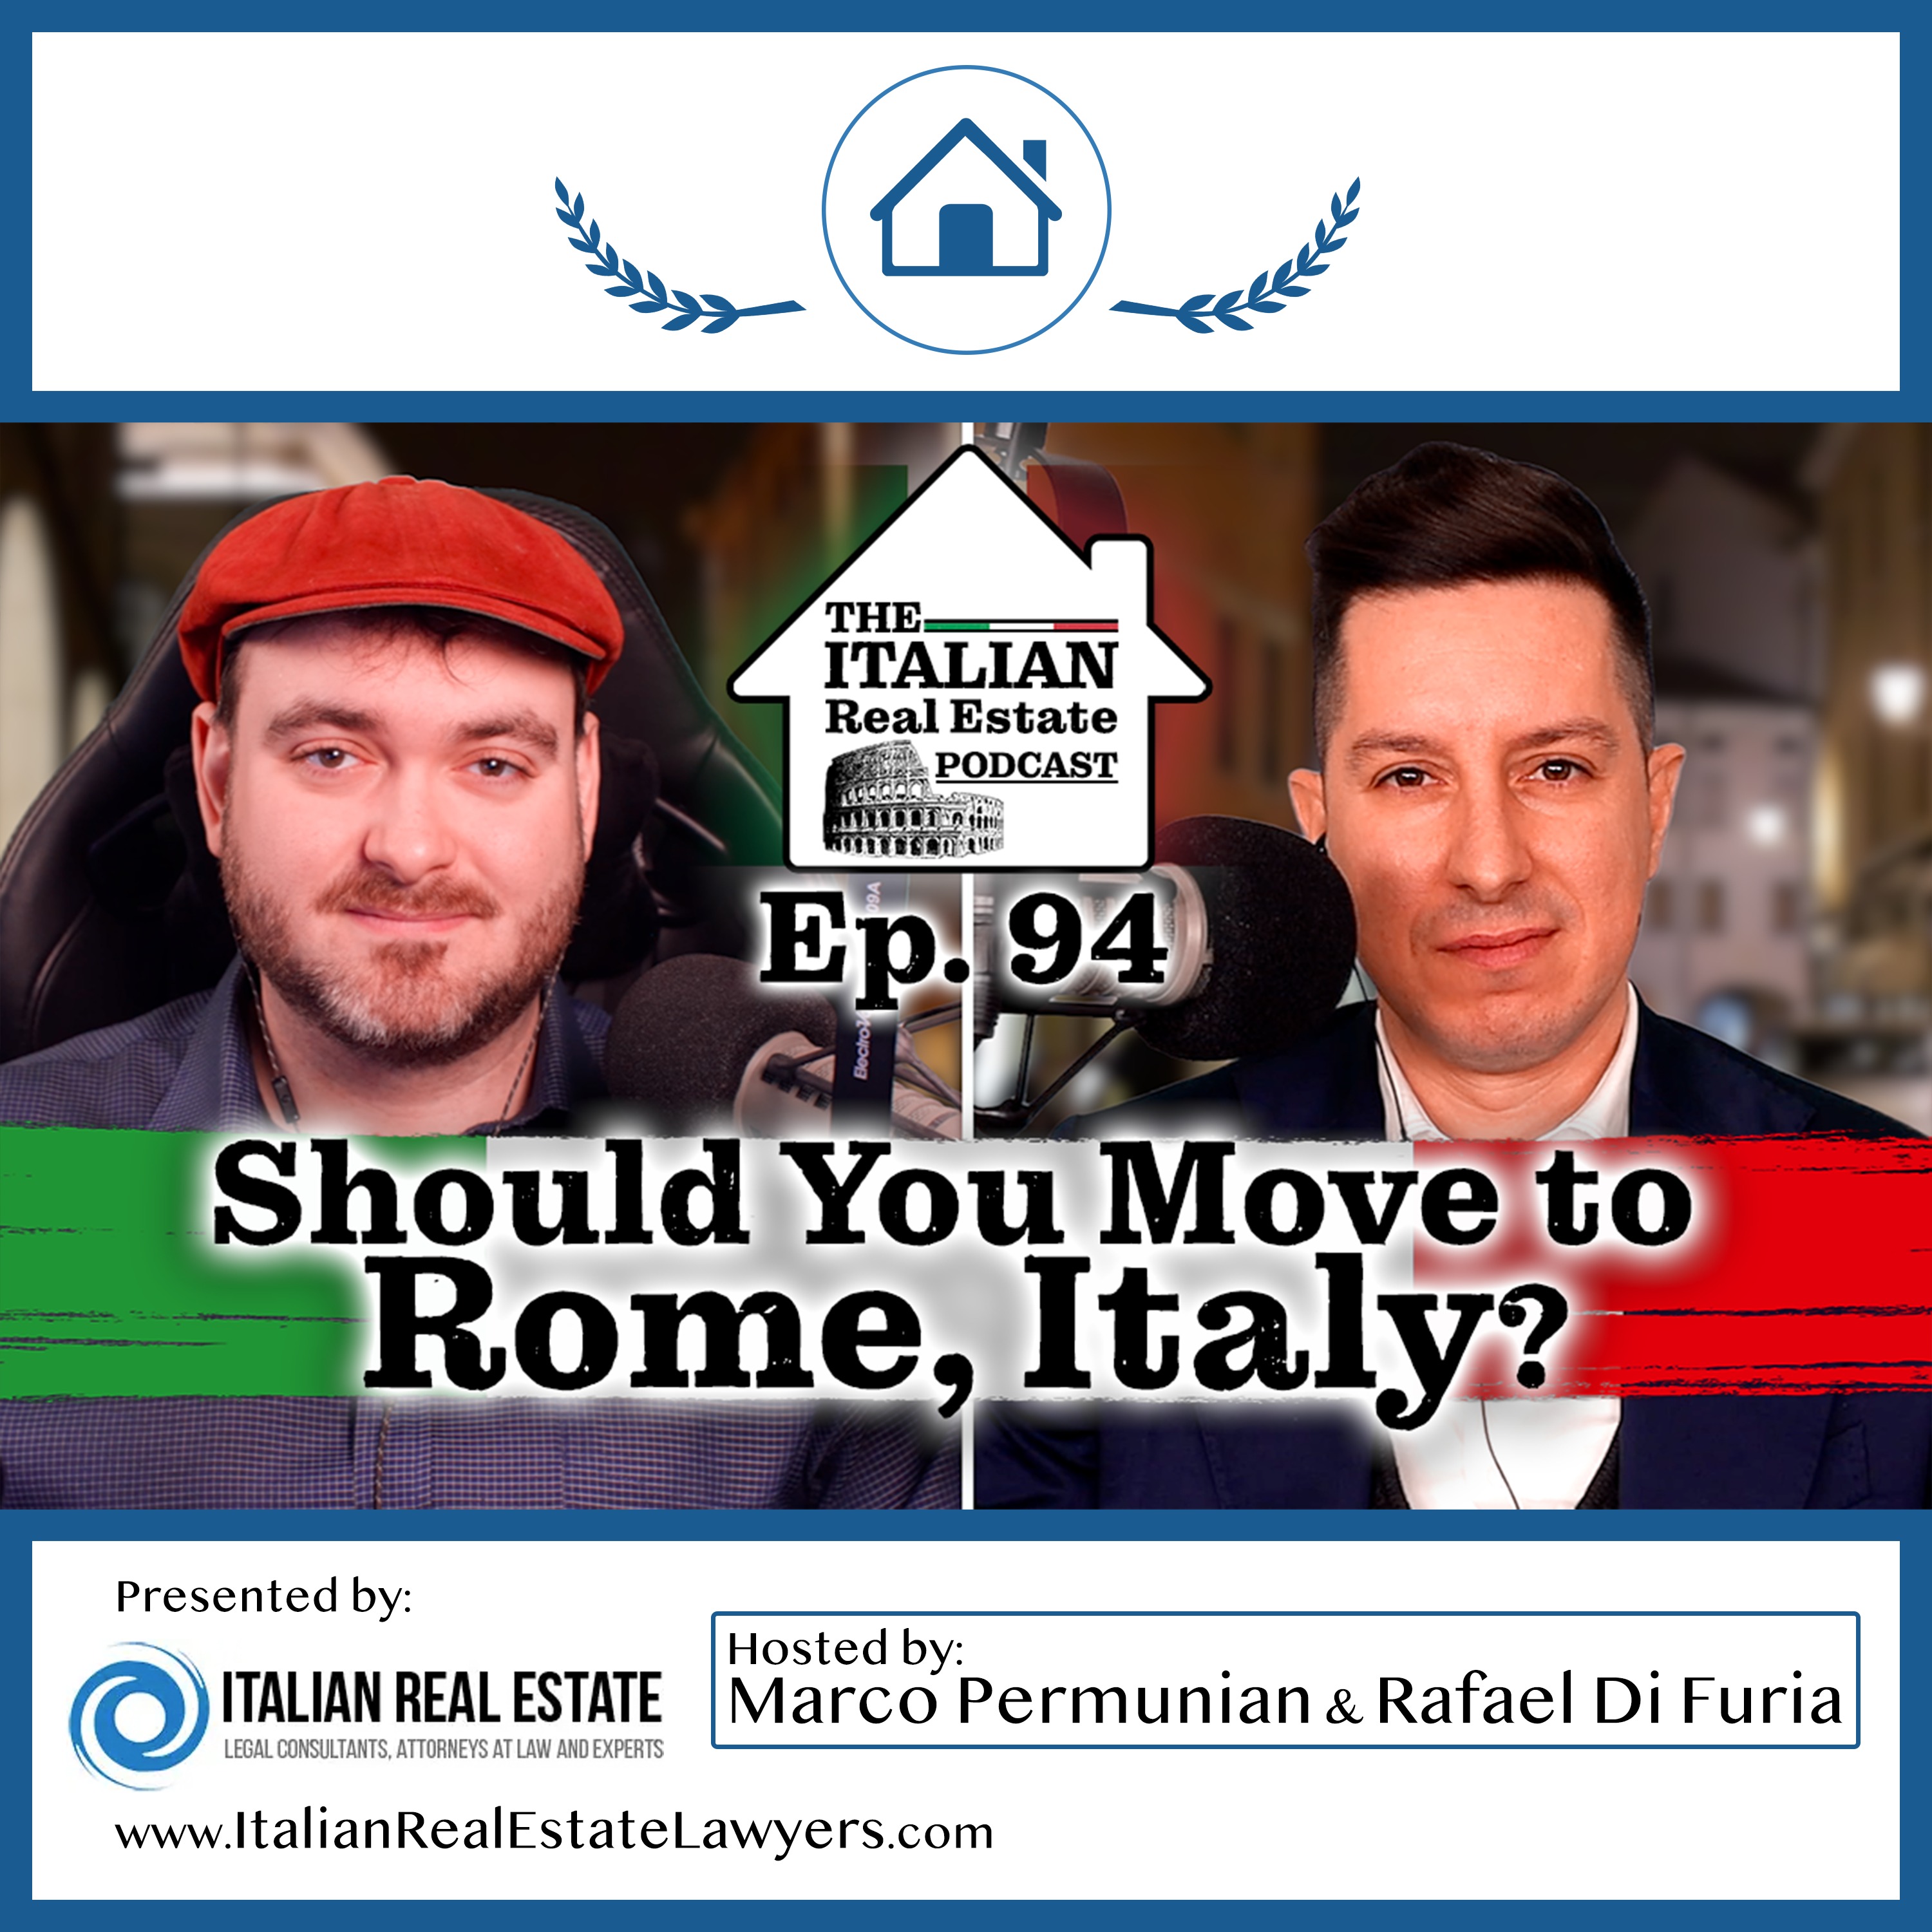 Should You Move To Rome, Italy?